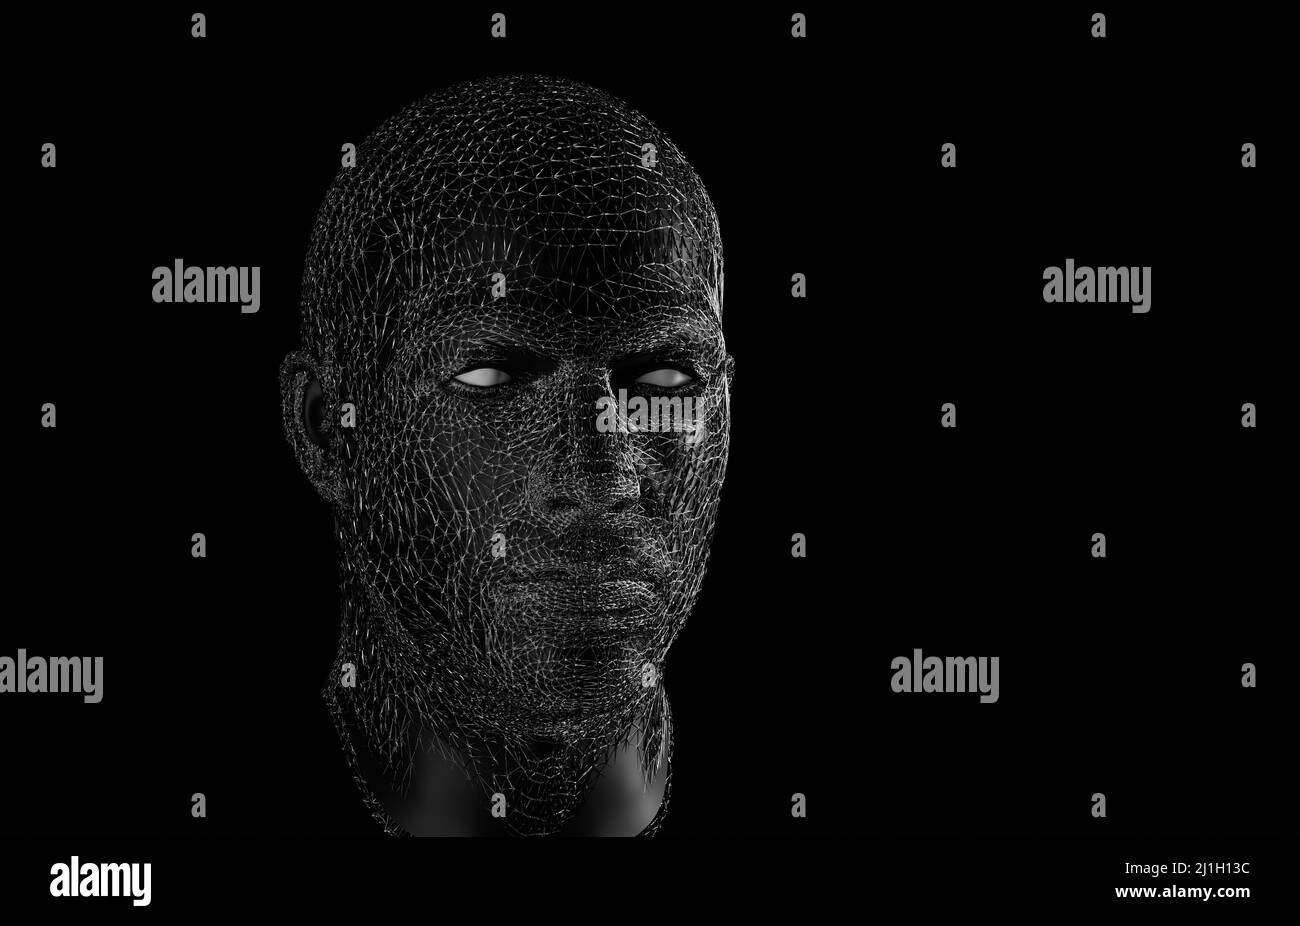 Black and white fragment abstract human head and face, 3d rendering of a cyborg head construction, artificial intelligence concept. Stock Photo